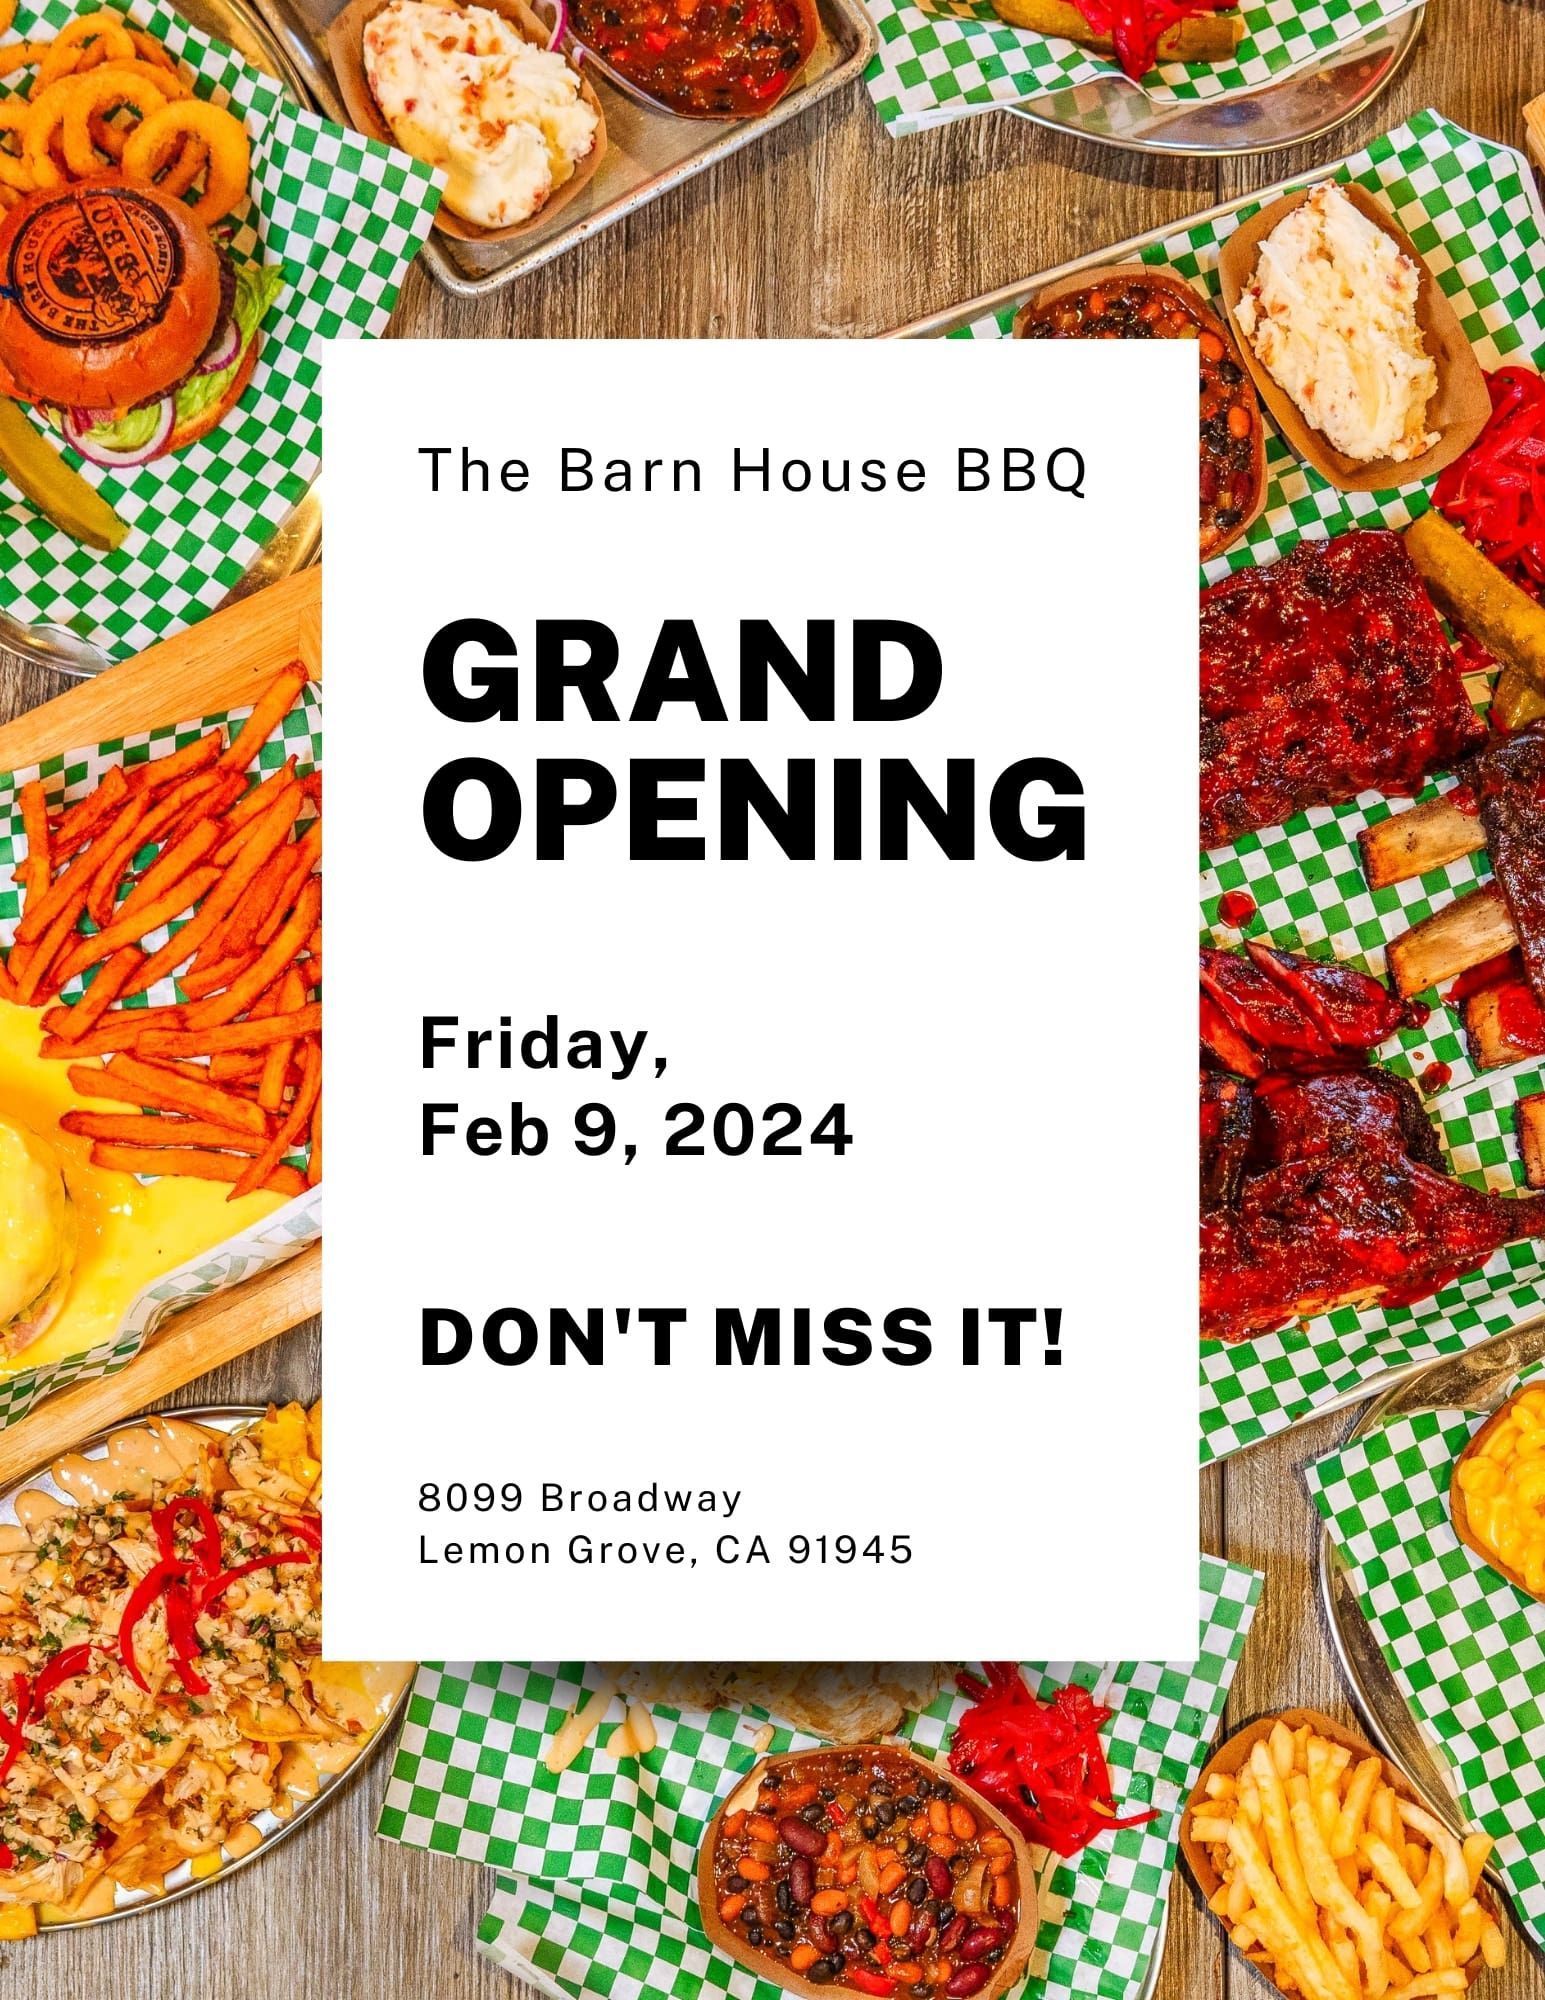 grand opening sale at The Barn House BBQ in Lemon Grove, San Diego California on Friday February 9th 2024